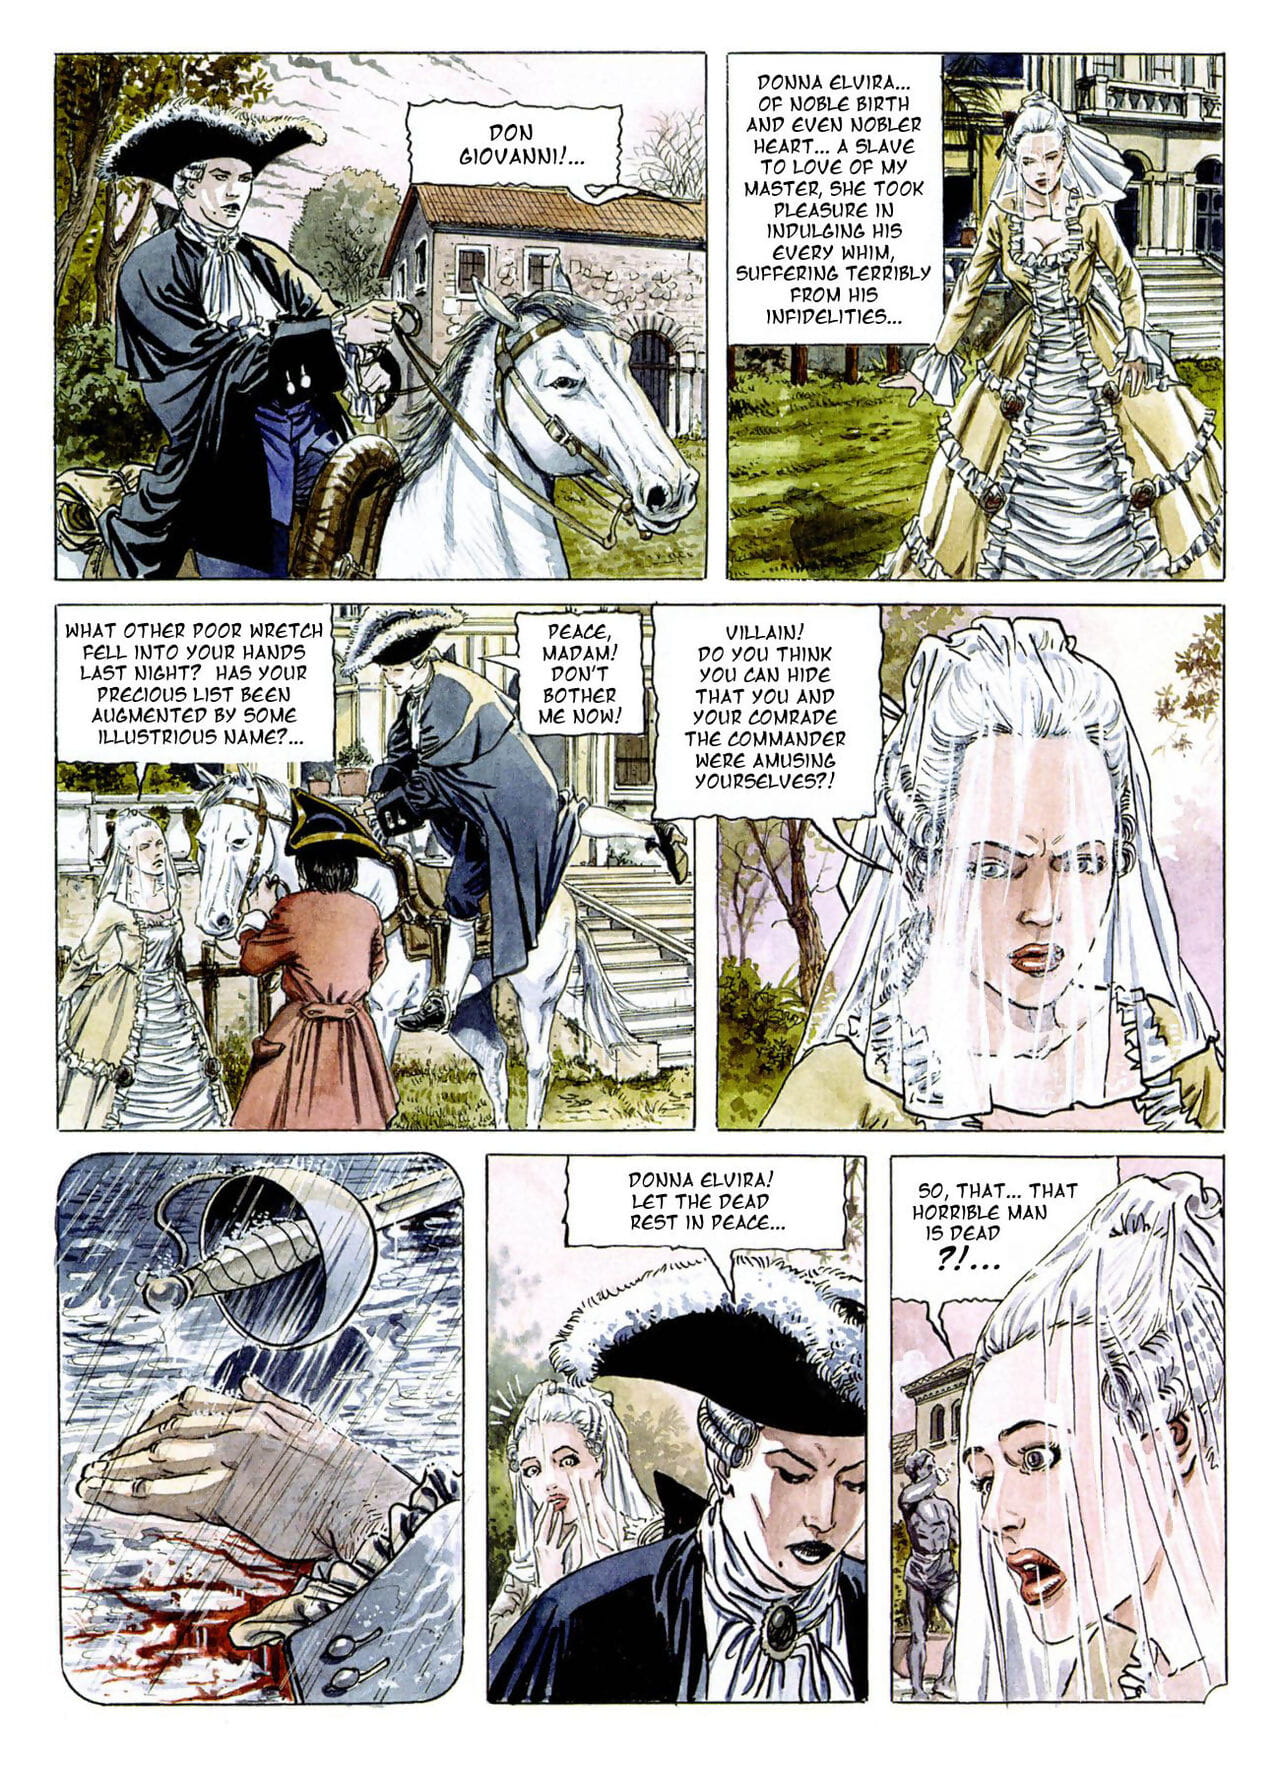 Don Giovanni page 1